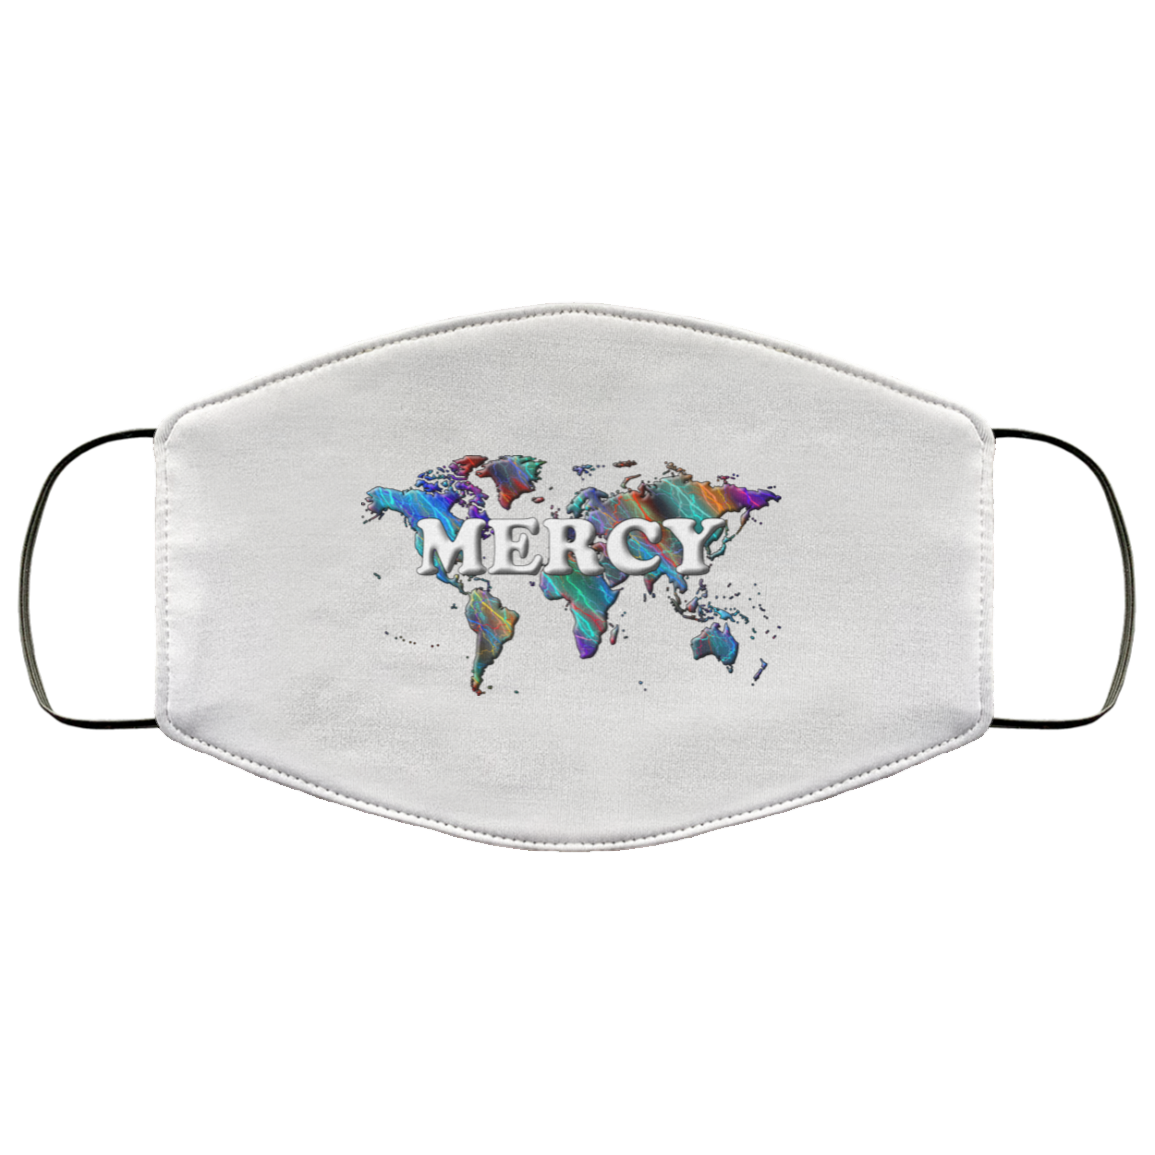 Mercy 2 Layer Protective Mask